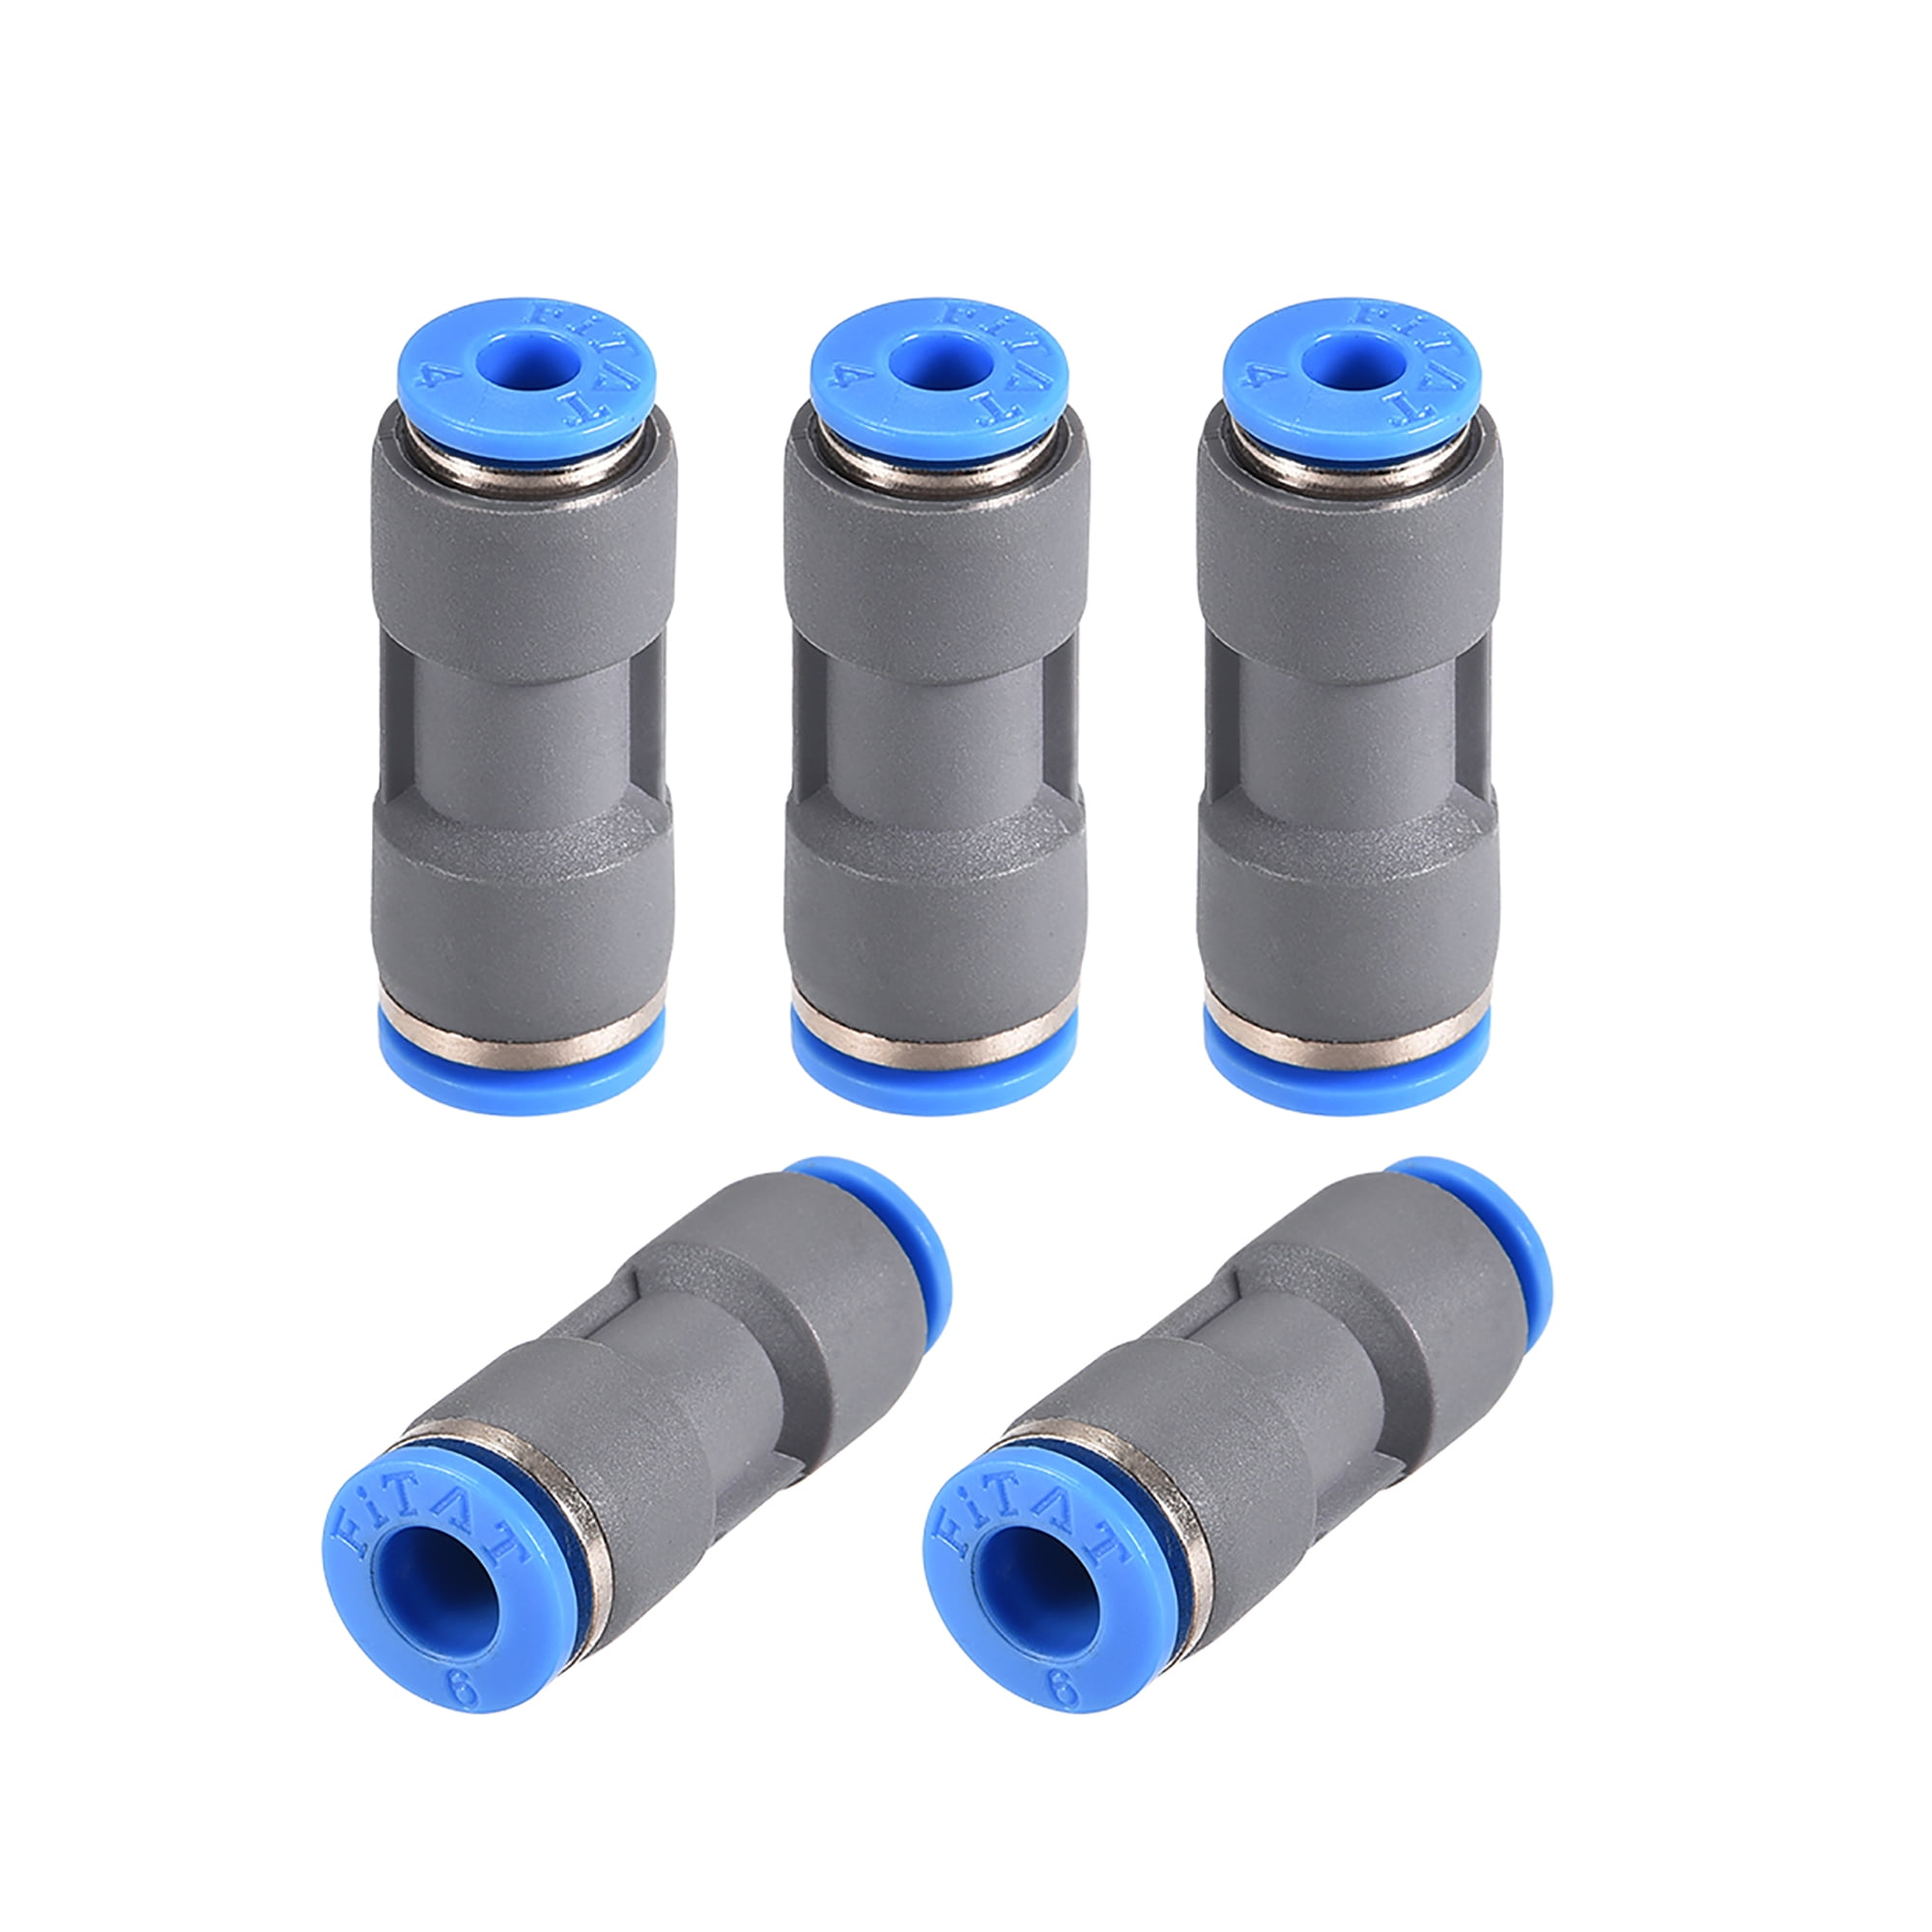 Nylon Pneumatic MALE STUD FITTING inline push fit connector 4mm pipe M6 thread